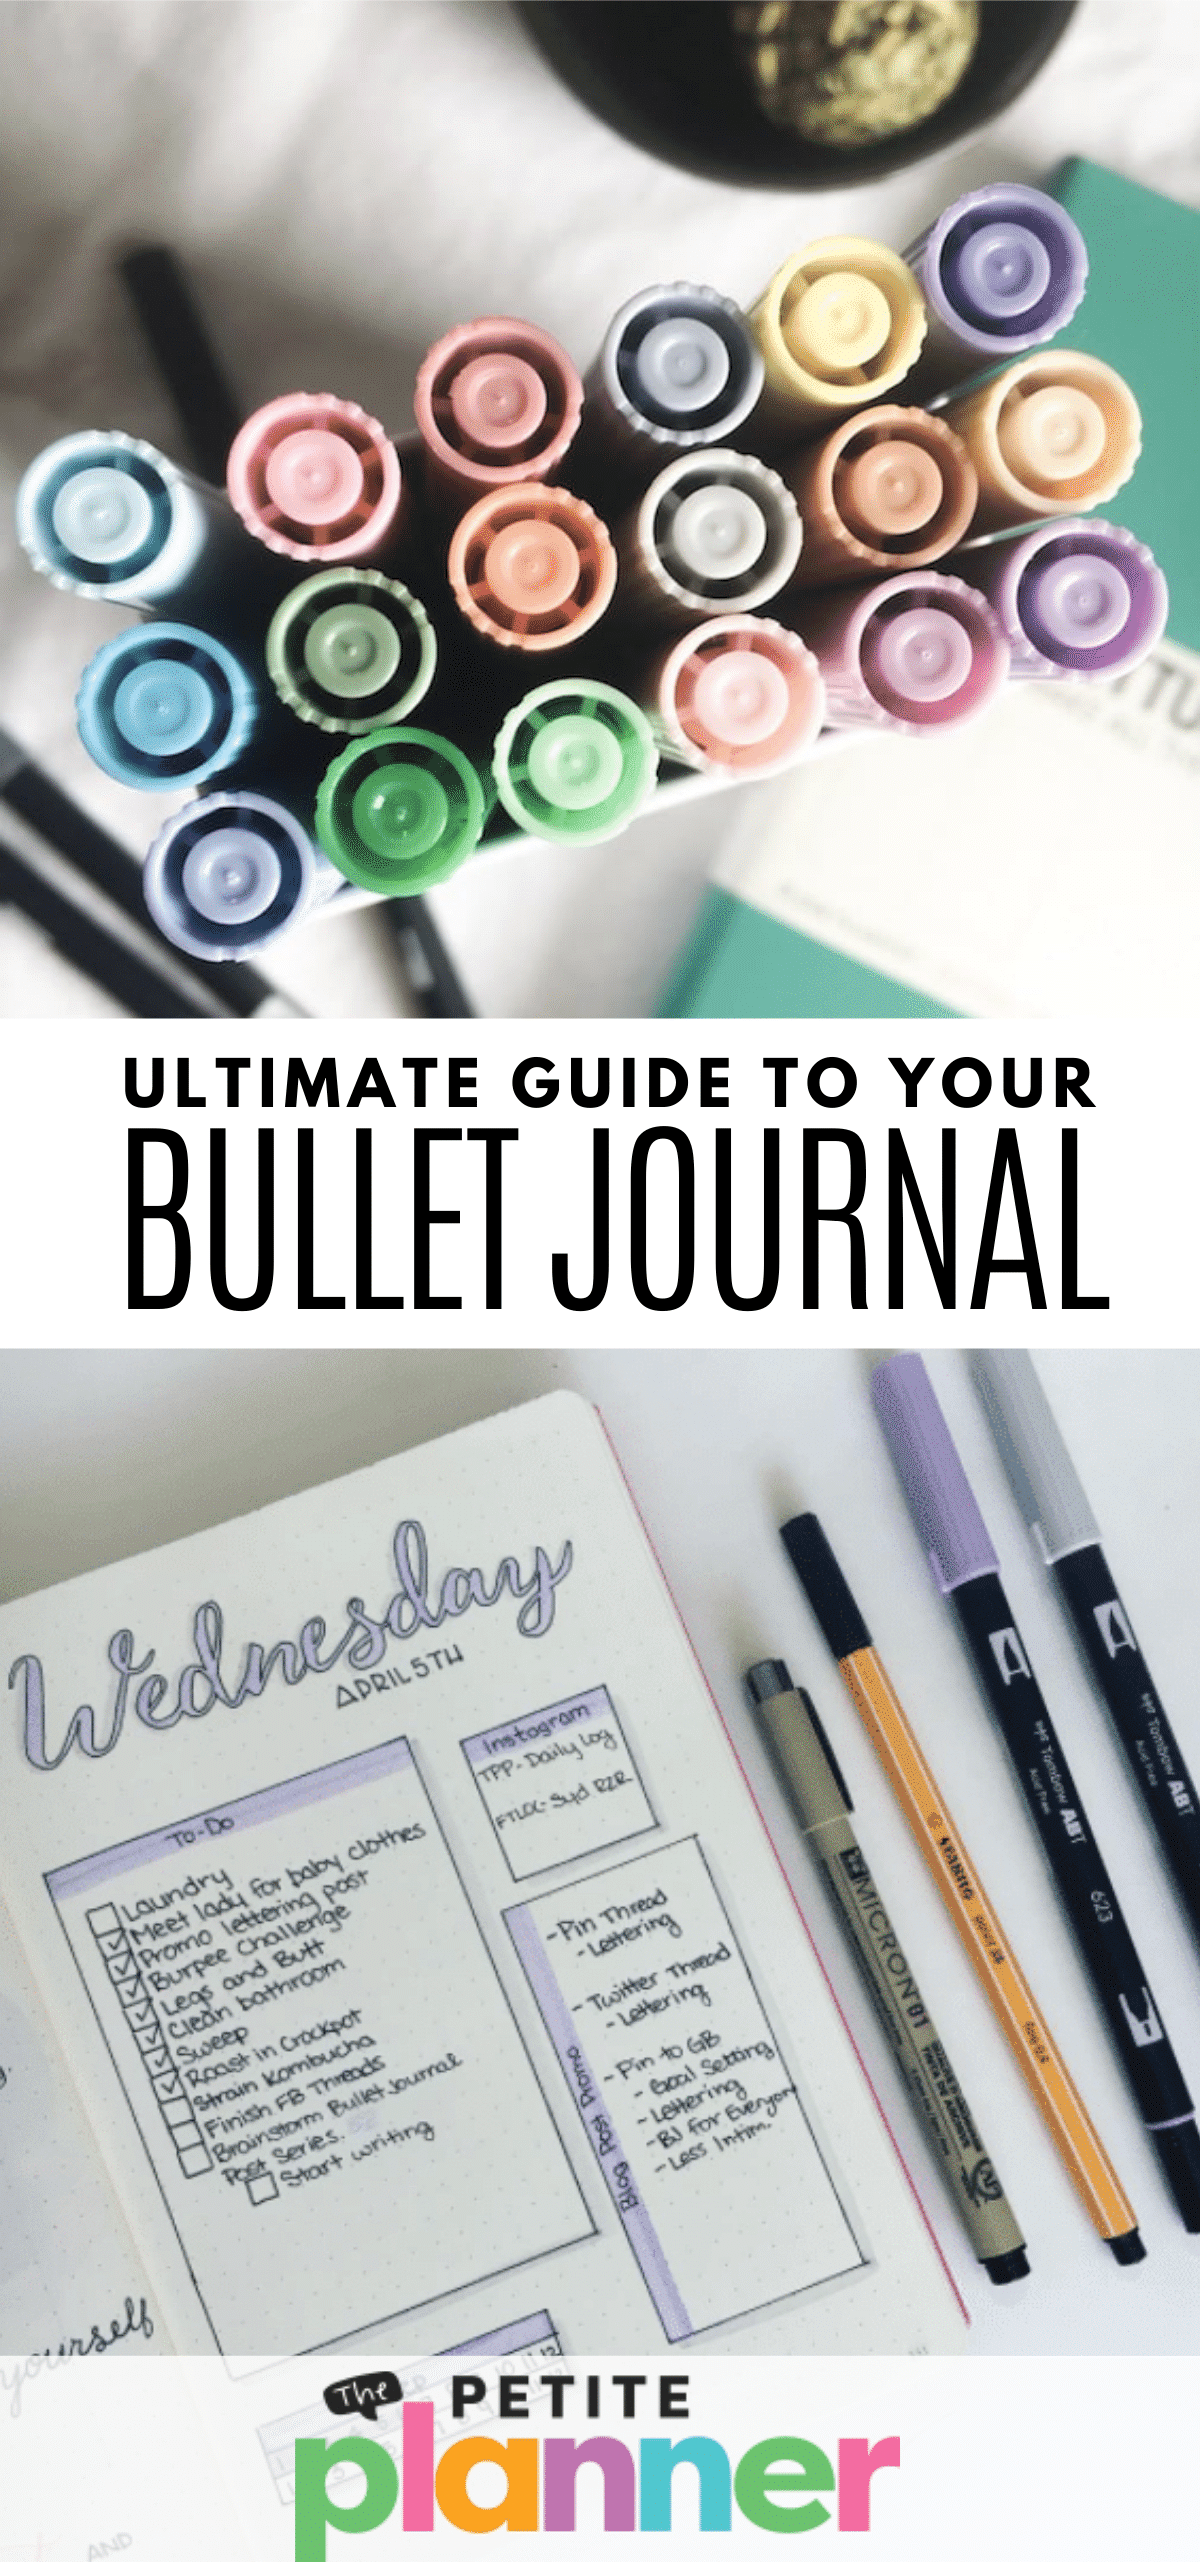 How to Bullet Journal for Beginners